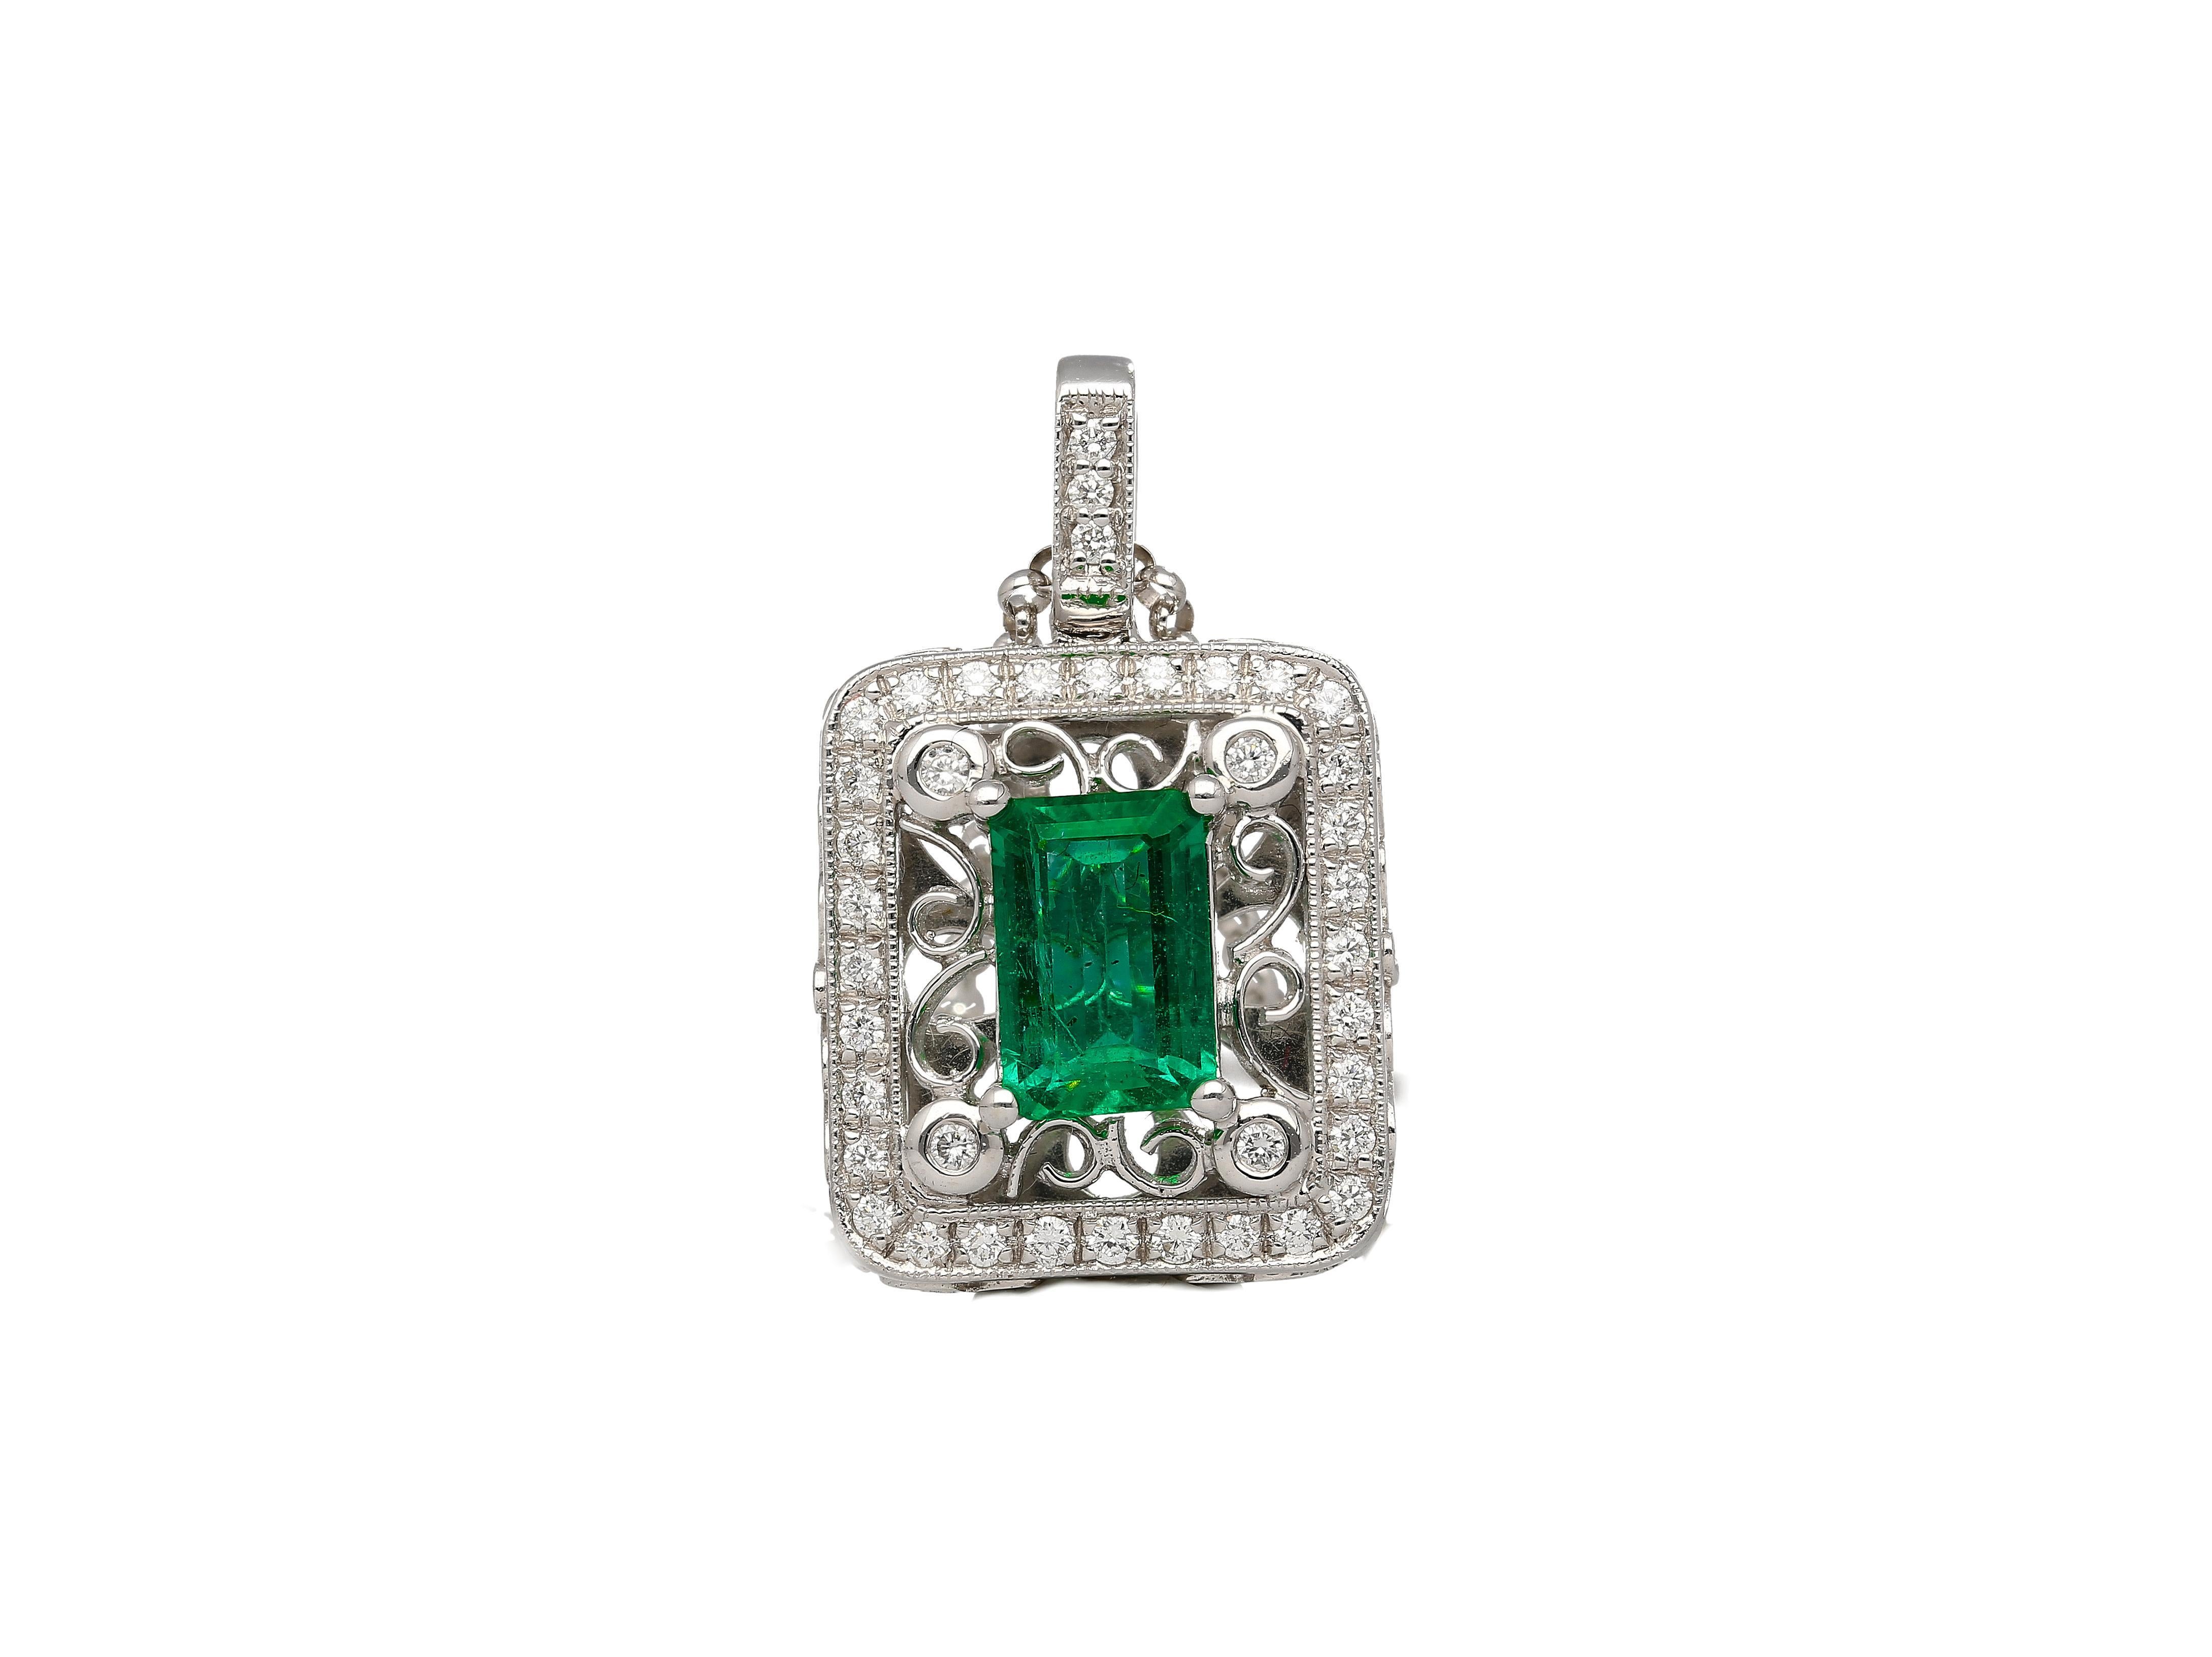 GIA Certified 1.39 Carat Zambian Emerald and Diamond Floral Box Pendant Necklace For Sale 4